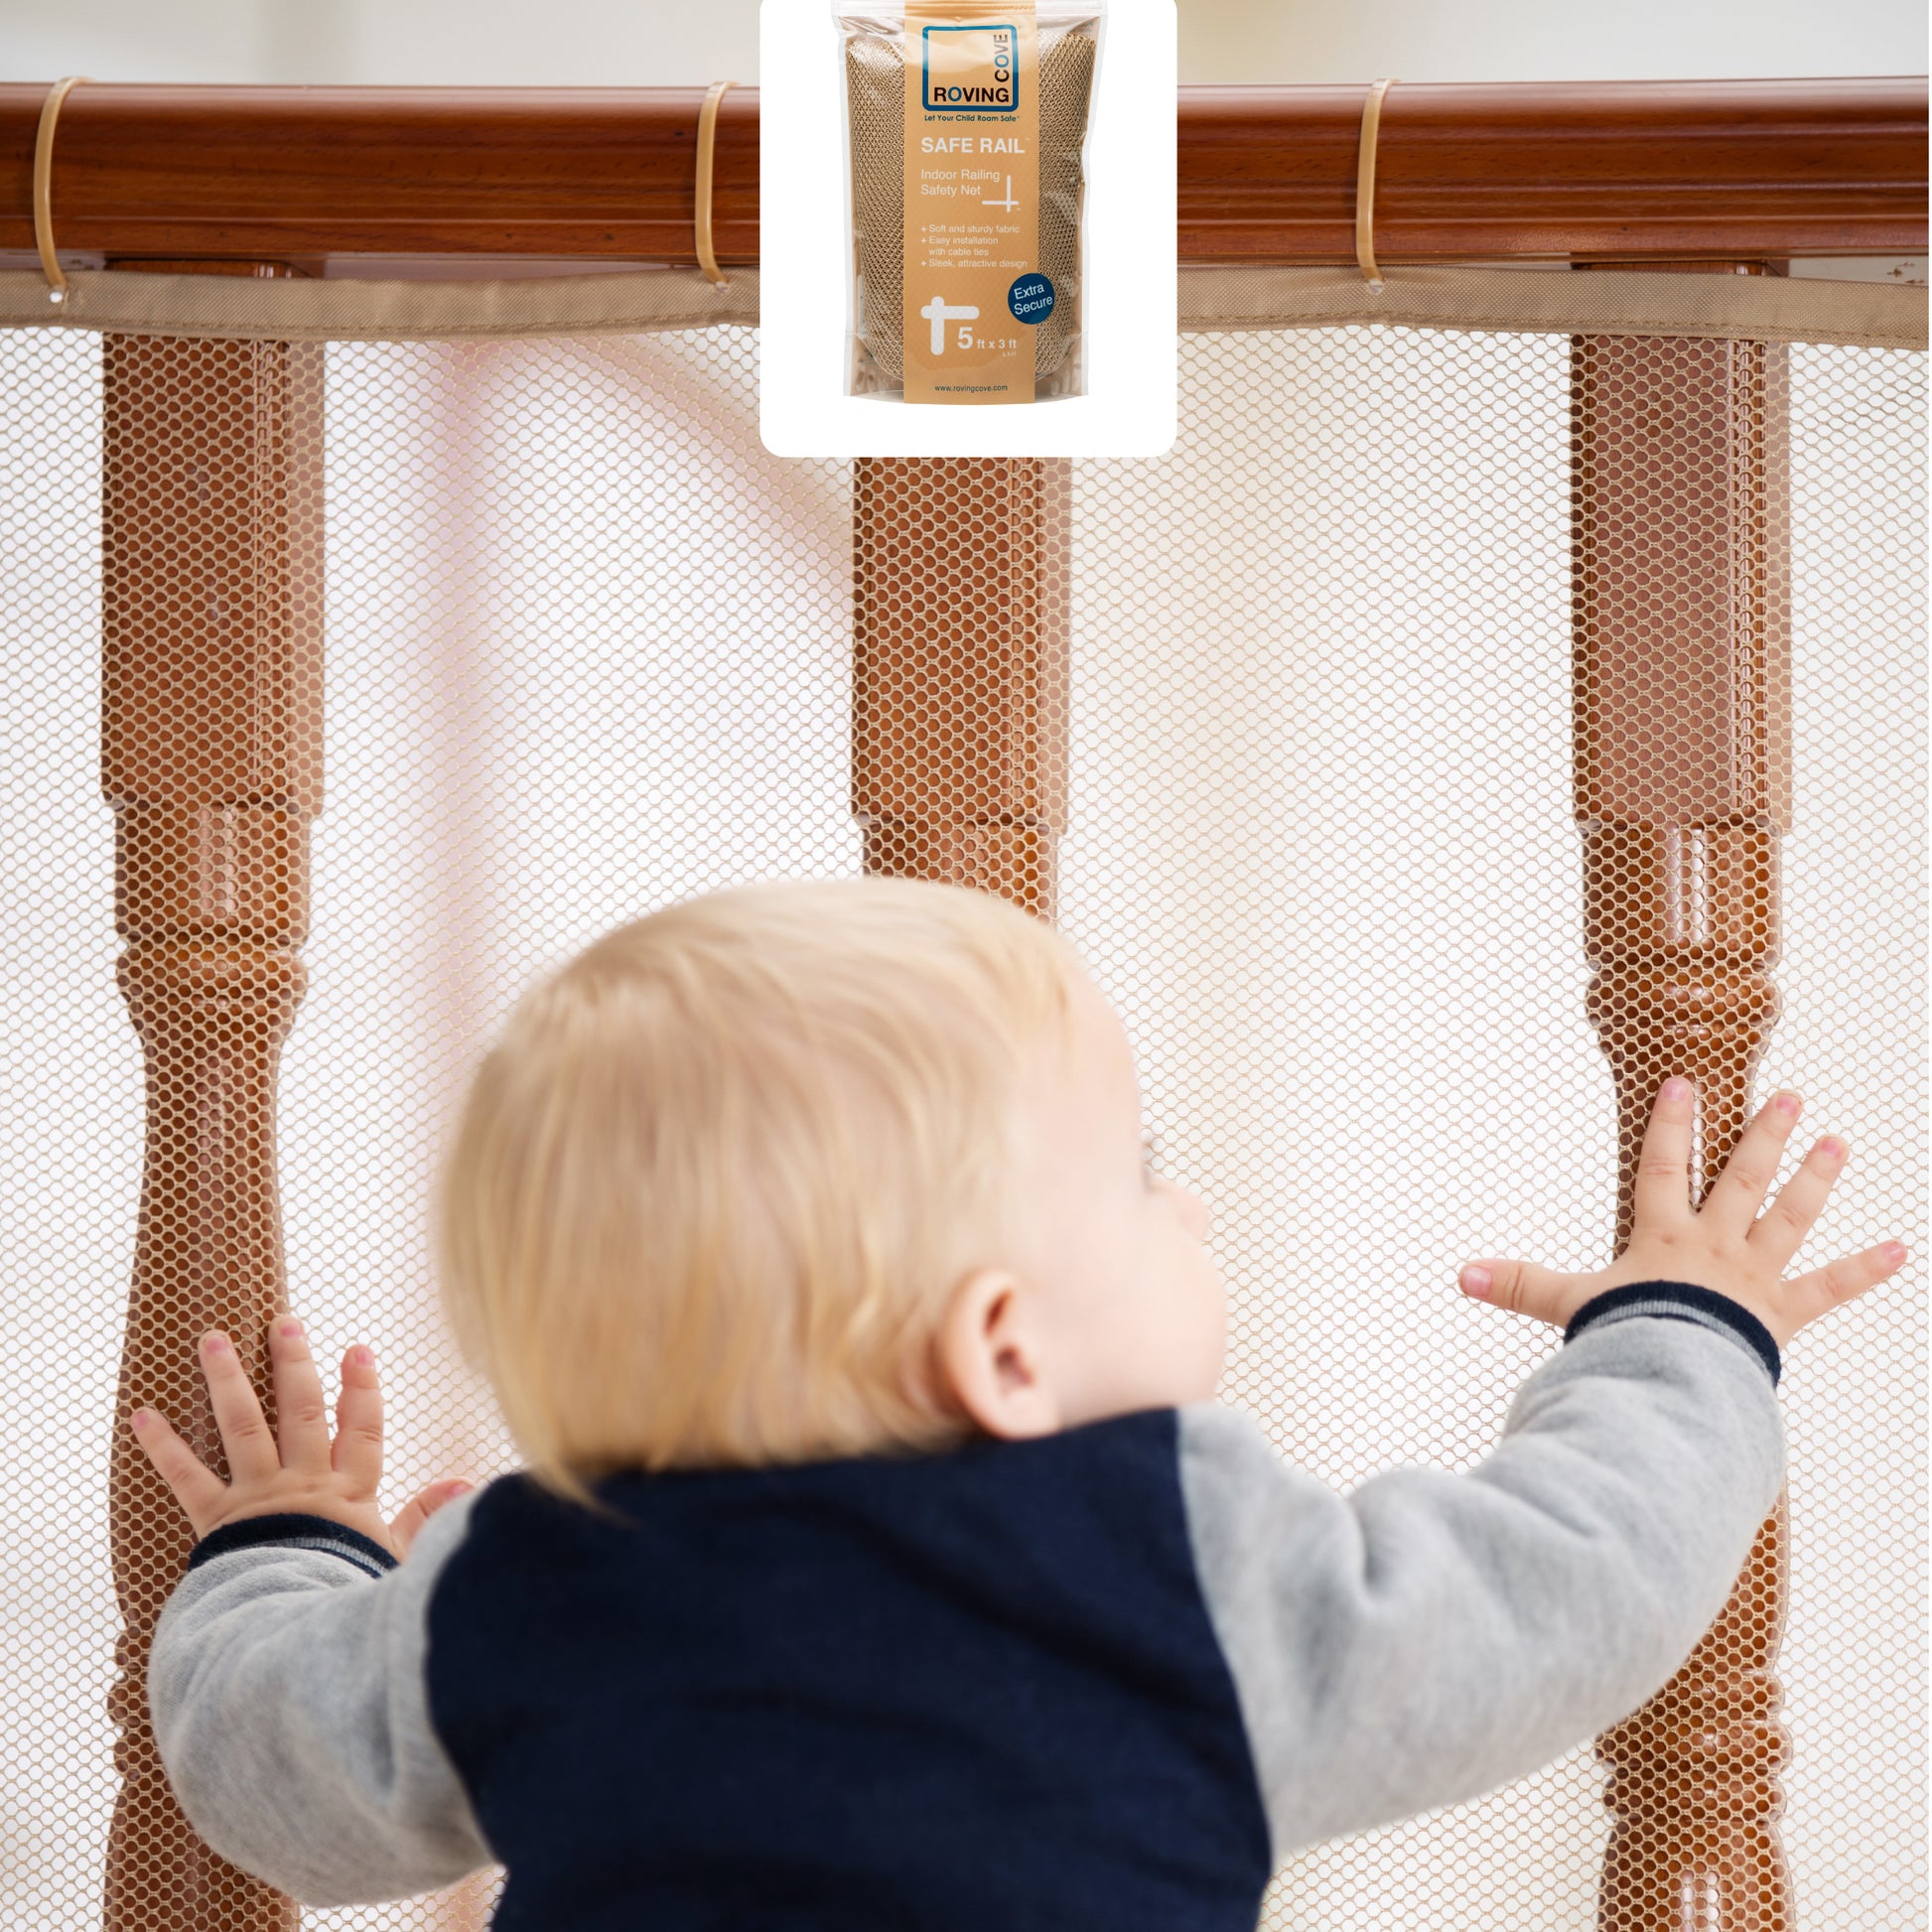 Roving Cove Stair Banister Guard, Railing Safety Net for Baby Proofing, 5ft  x 3ft, Almond Brown